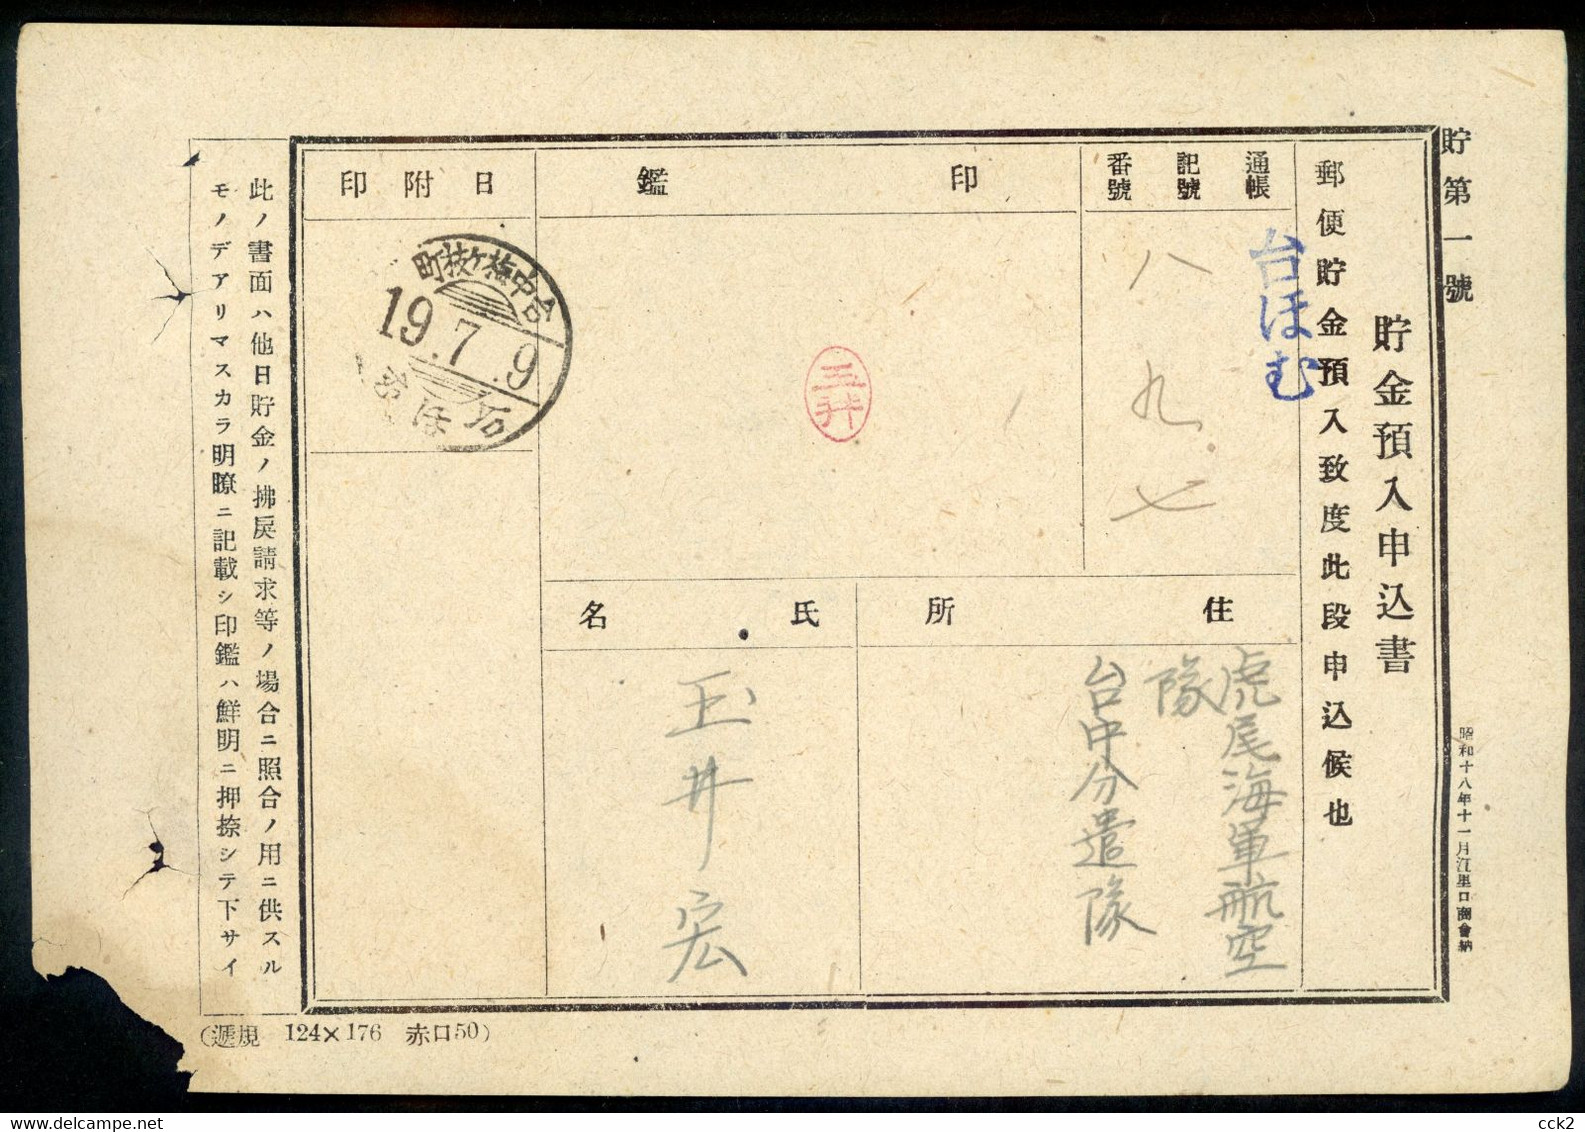 JAPAN OCCUPATION TAIWAN- Postal Convenience Savings Fund Advance Deposit Application Form (1) - 1945 Occupazione Giapponese